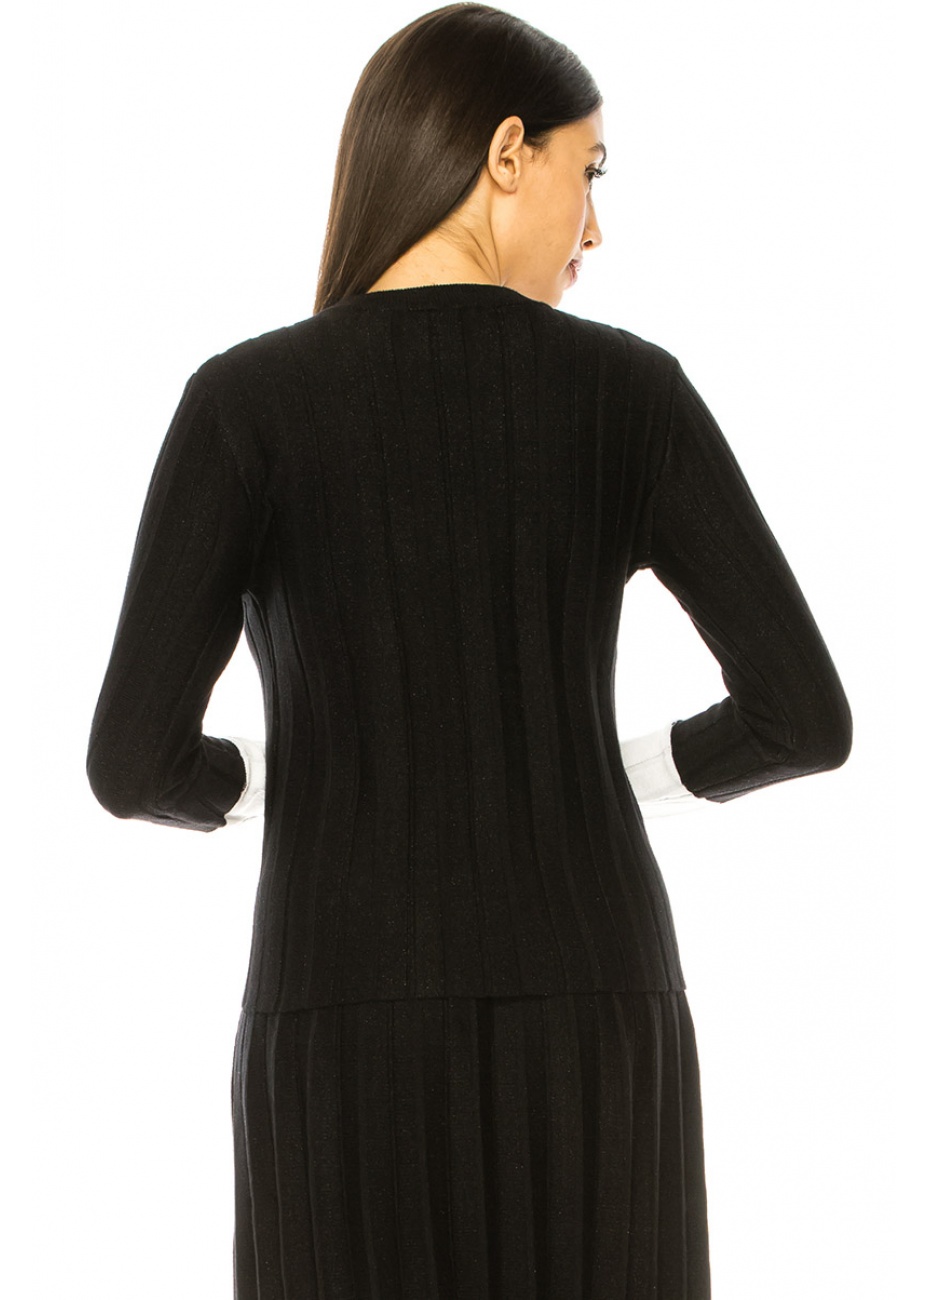 Ribbed Black Sweater With White Cuffs